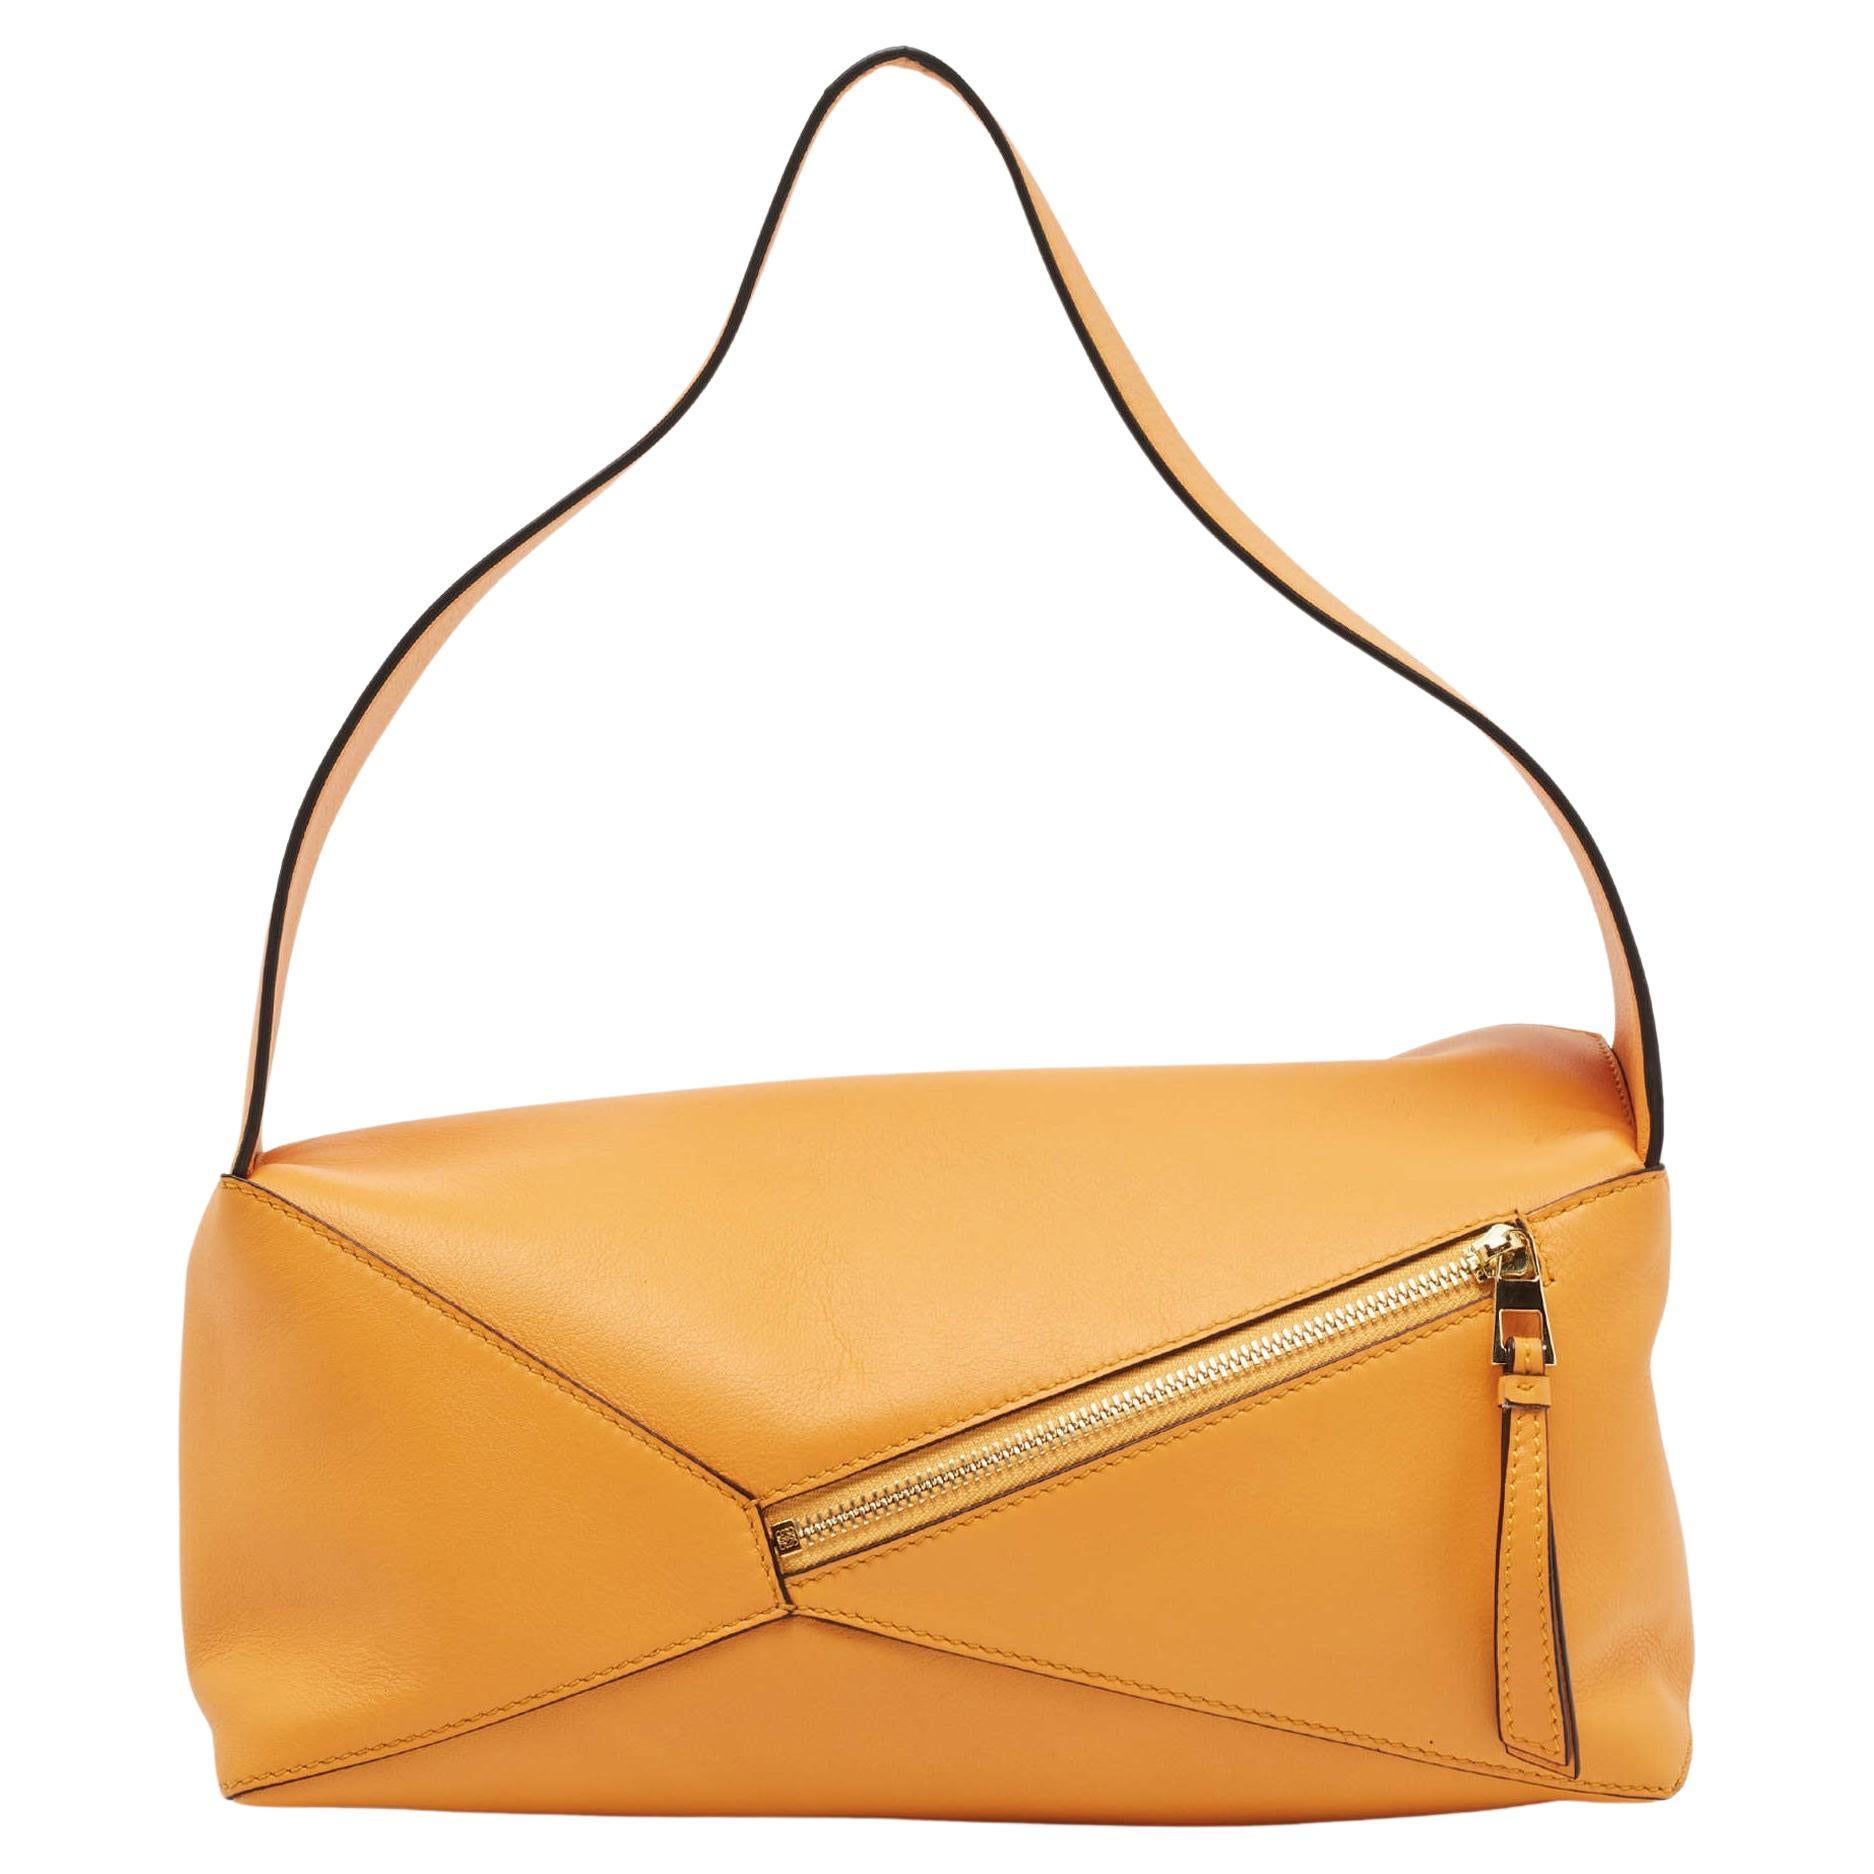 This Puzzle shoulder bag from Loewe will make you go head over heels with its appeal and fine craftsmanship. This stupendous creation is crafted from leather in a very artistic way. It comes with a canvas-lined interior and a back zip pocket, and